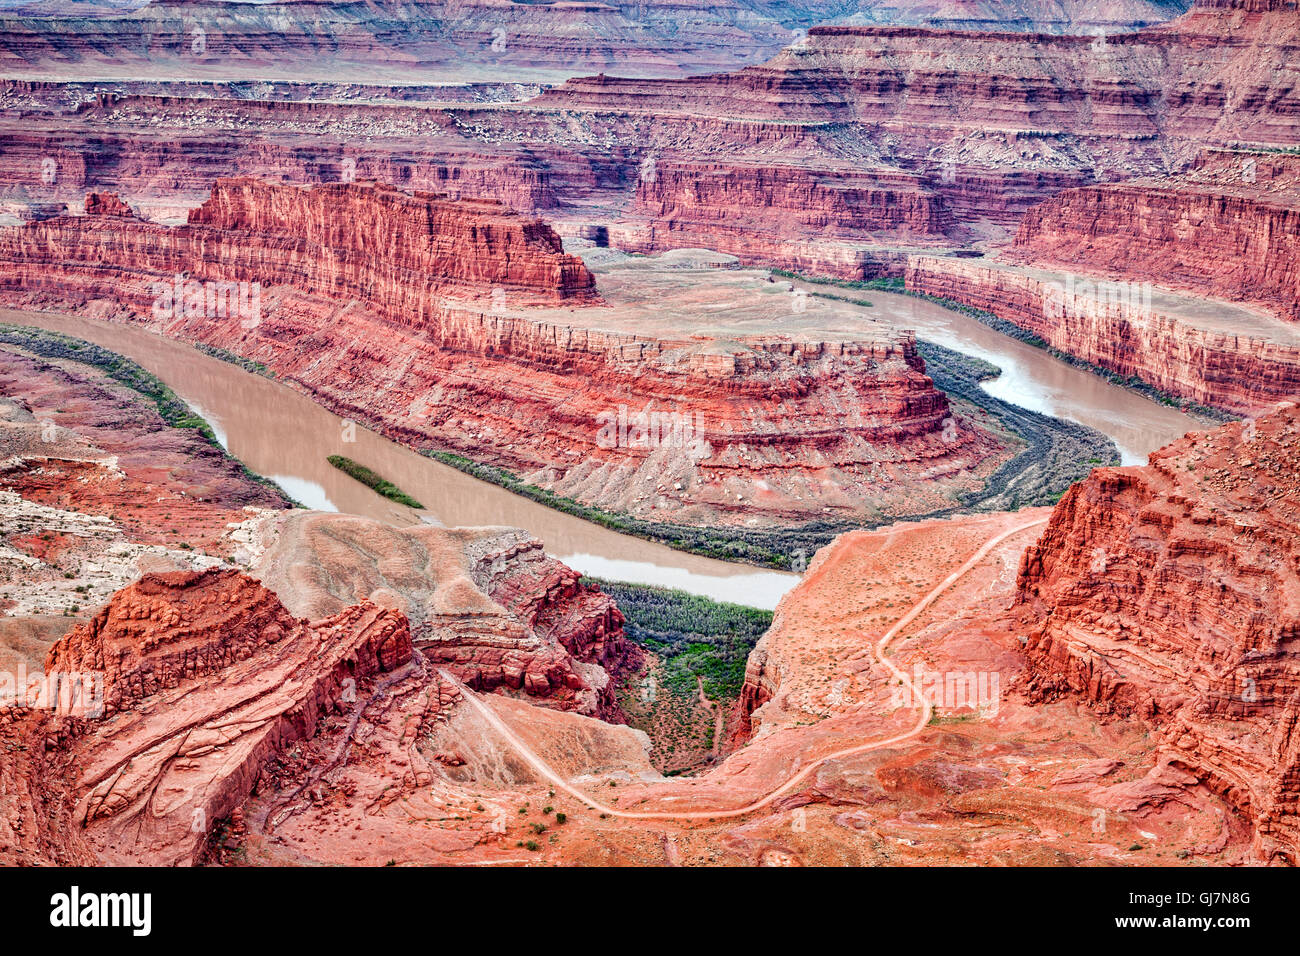 The Colorado River at Dead Horse Point State Park, Utah, USA Stock Photo